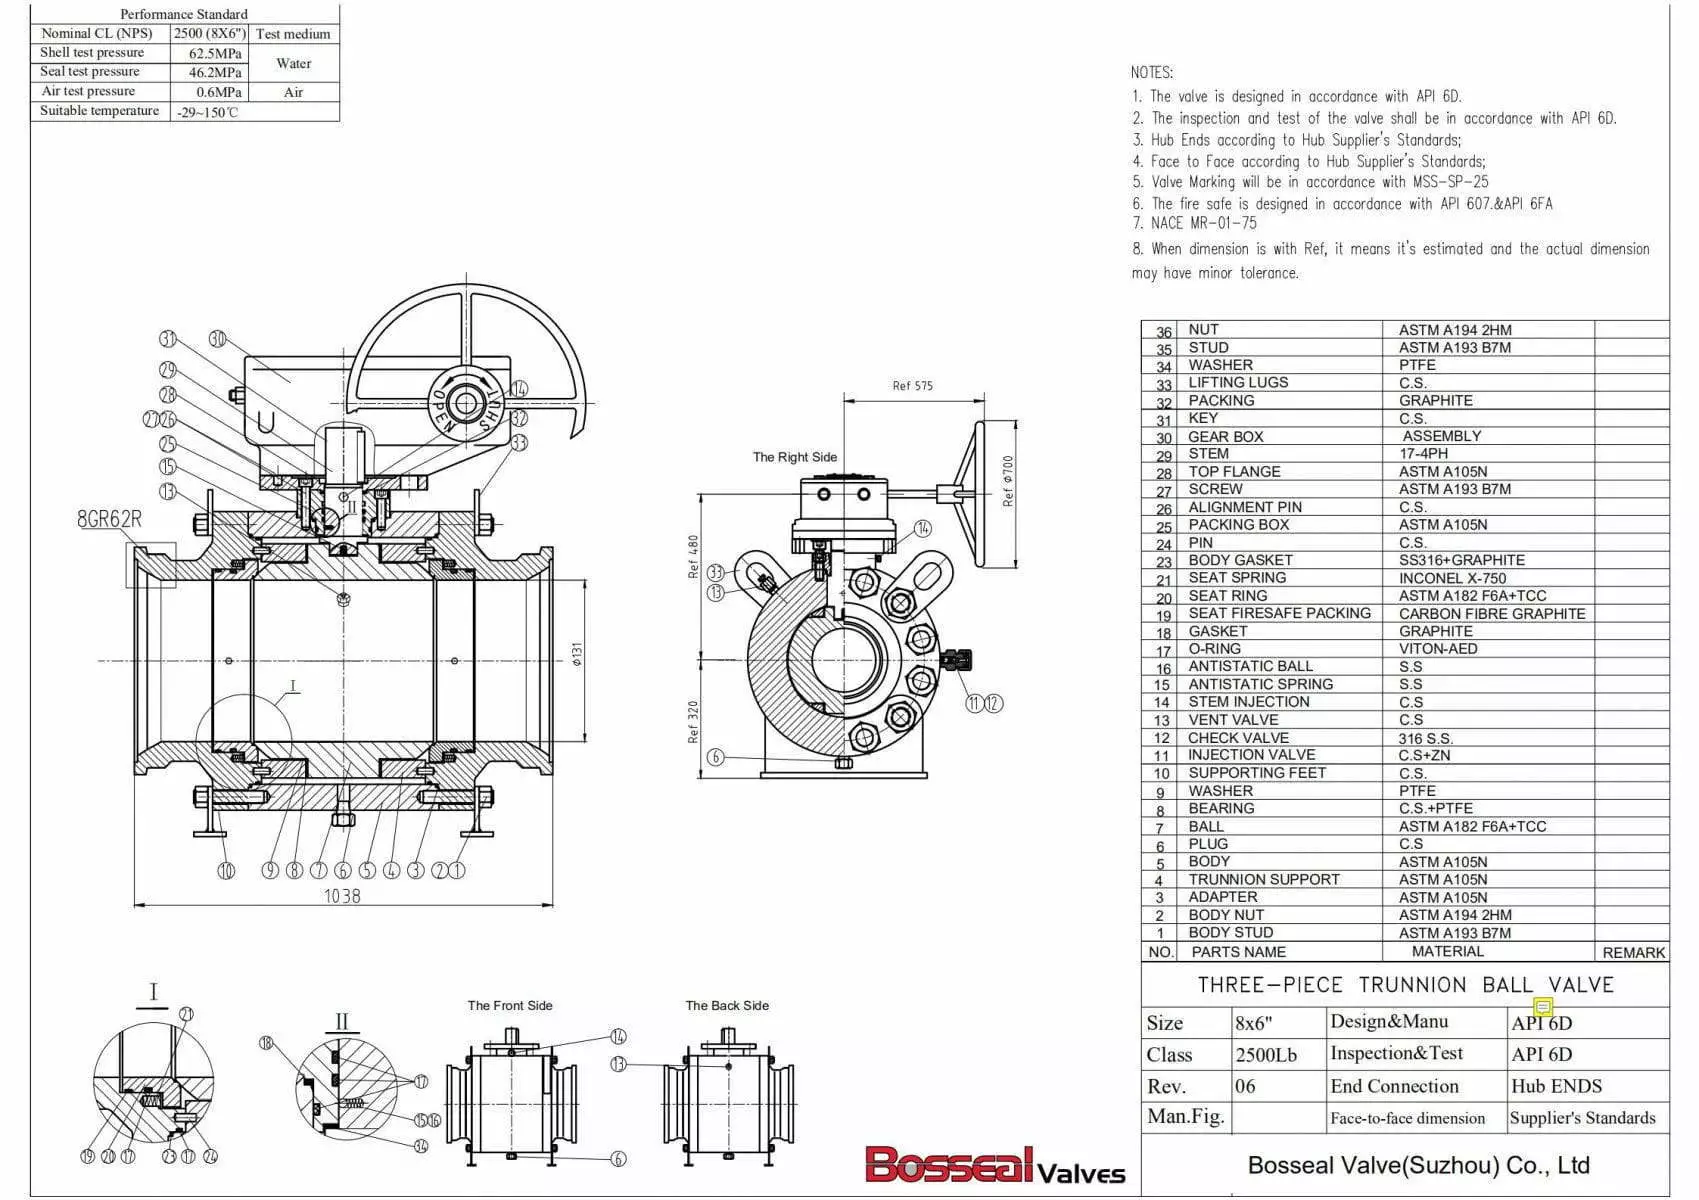 Double Block and Bleed Ball Valve Tech Drawing